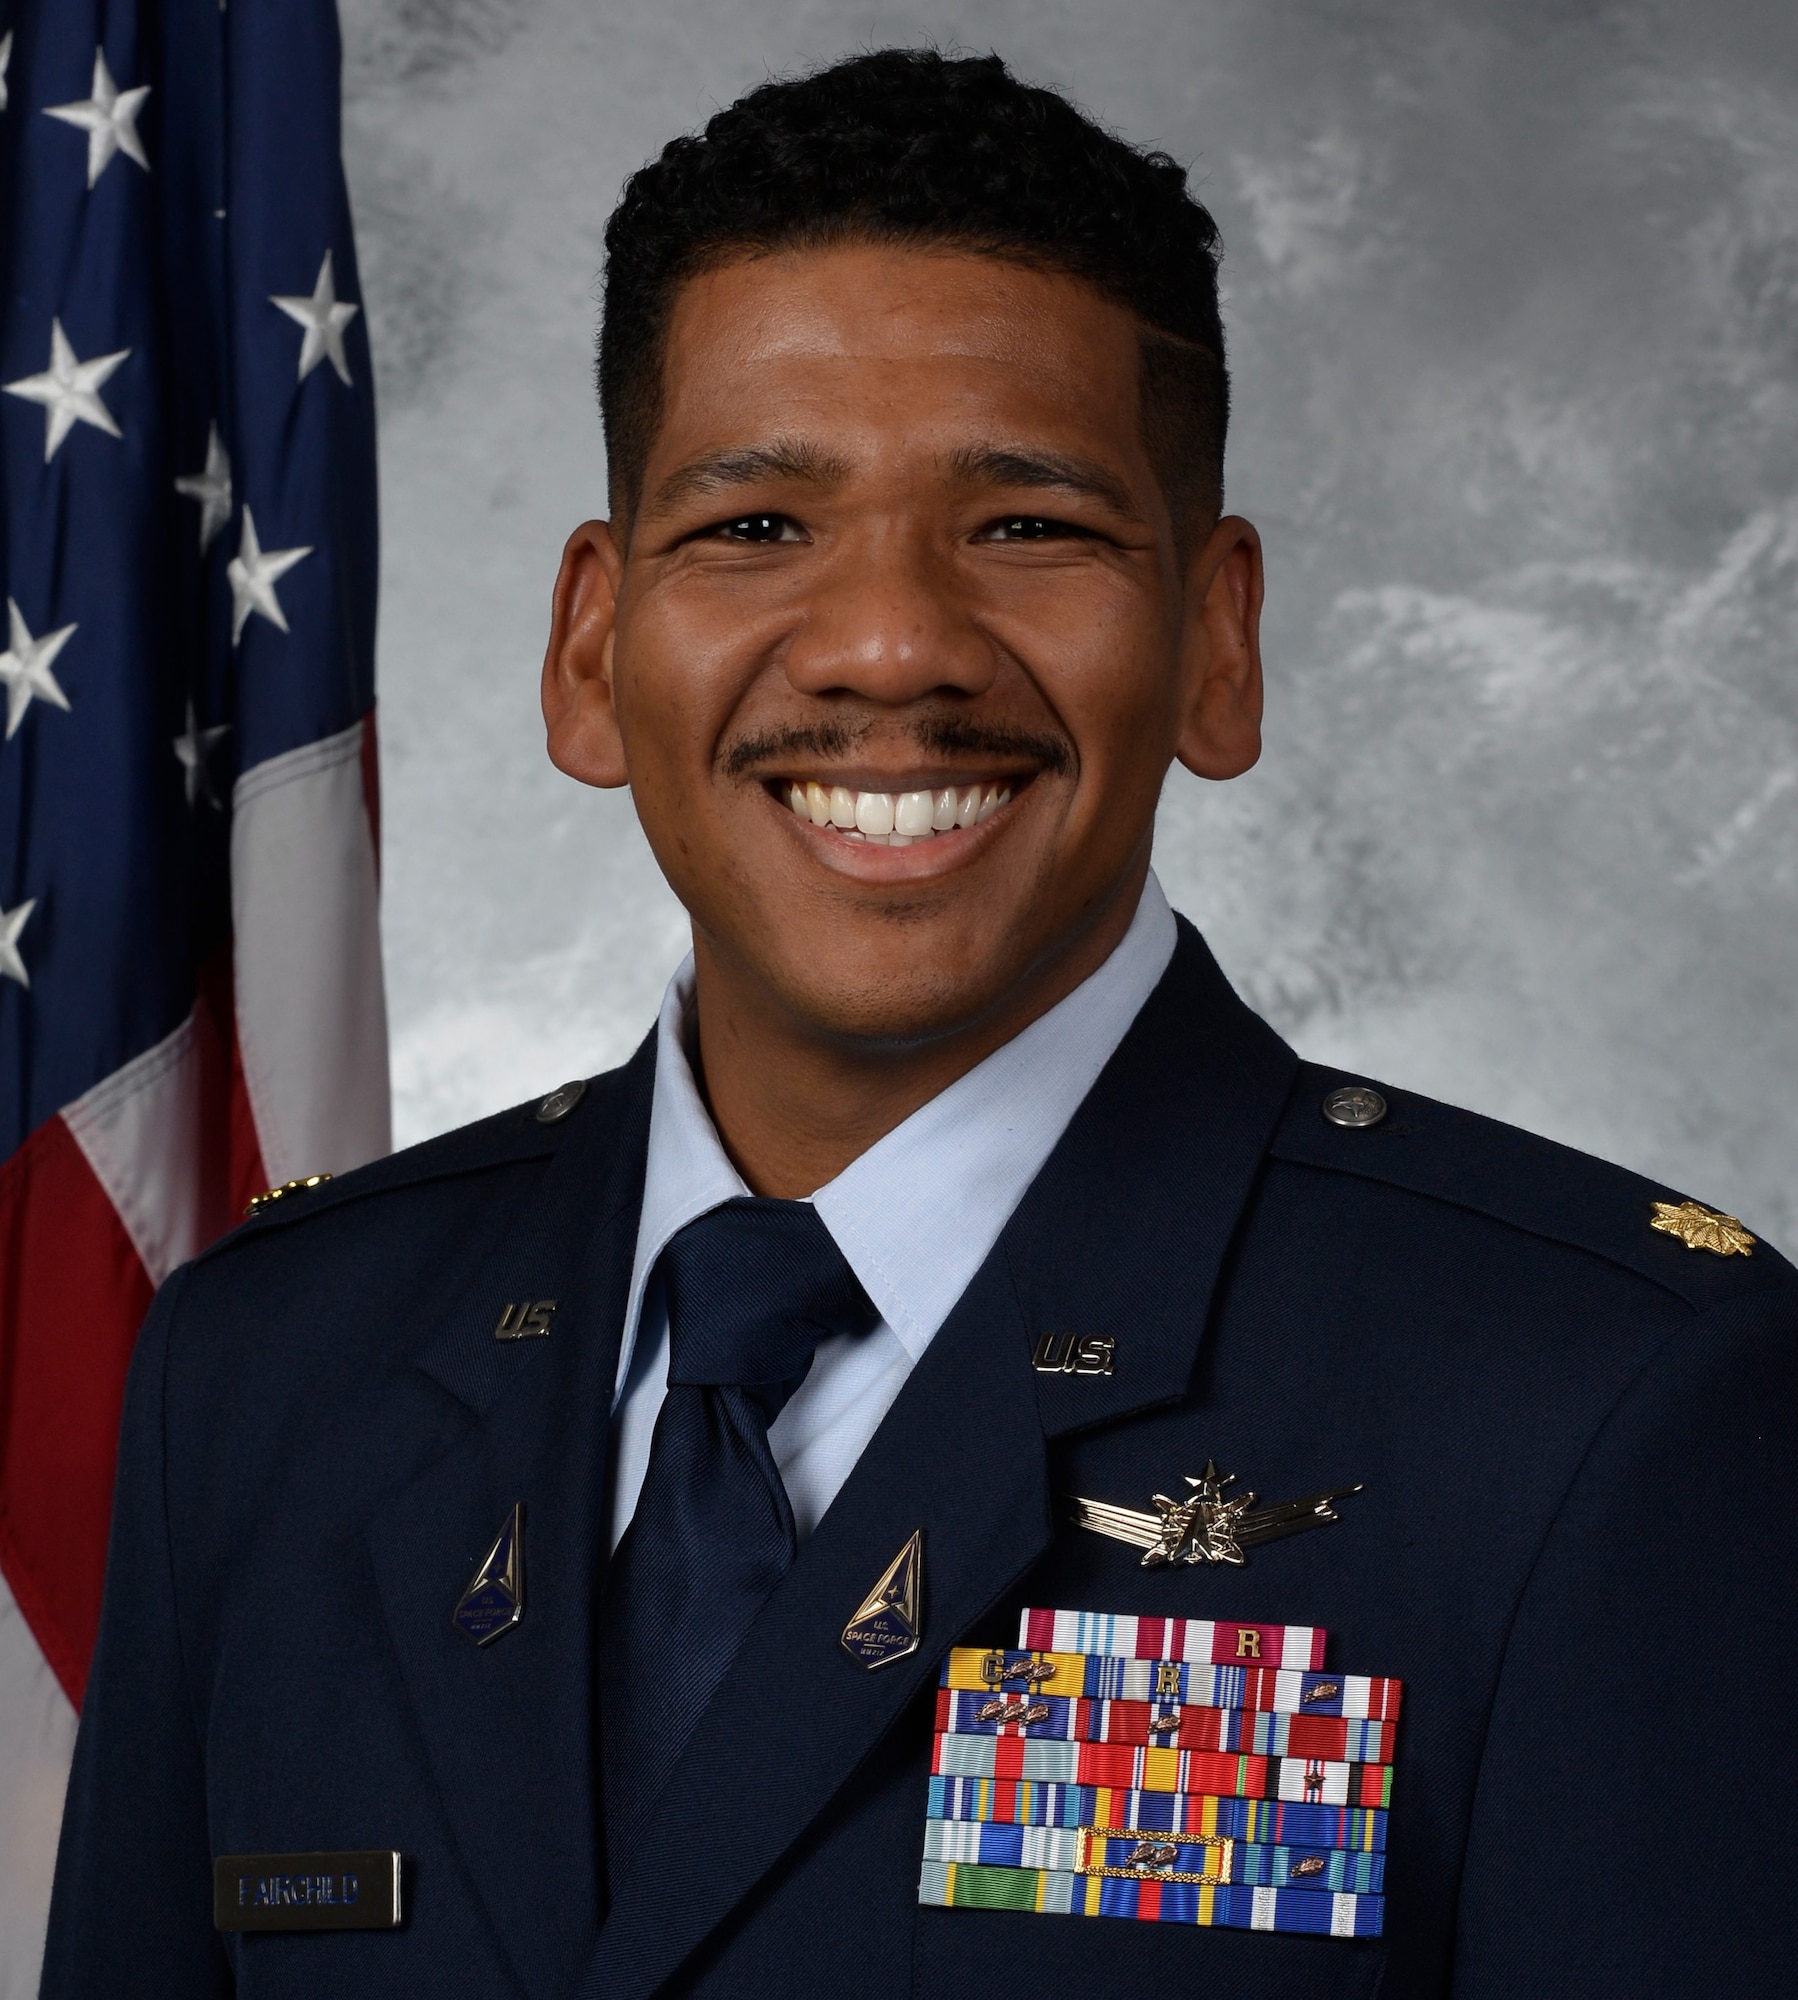 U.S. Space Force Maj. Marcus “BISHOP” Fairchild, the 328th Weapons Squadron Chief of Space Integration and U.S. Air Force Weapons School Instructor in Space Superiority, was named the USSF’s Space Operator of the Year in the Field Grade Officer category.